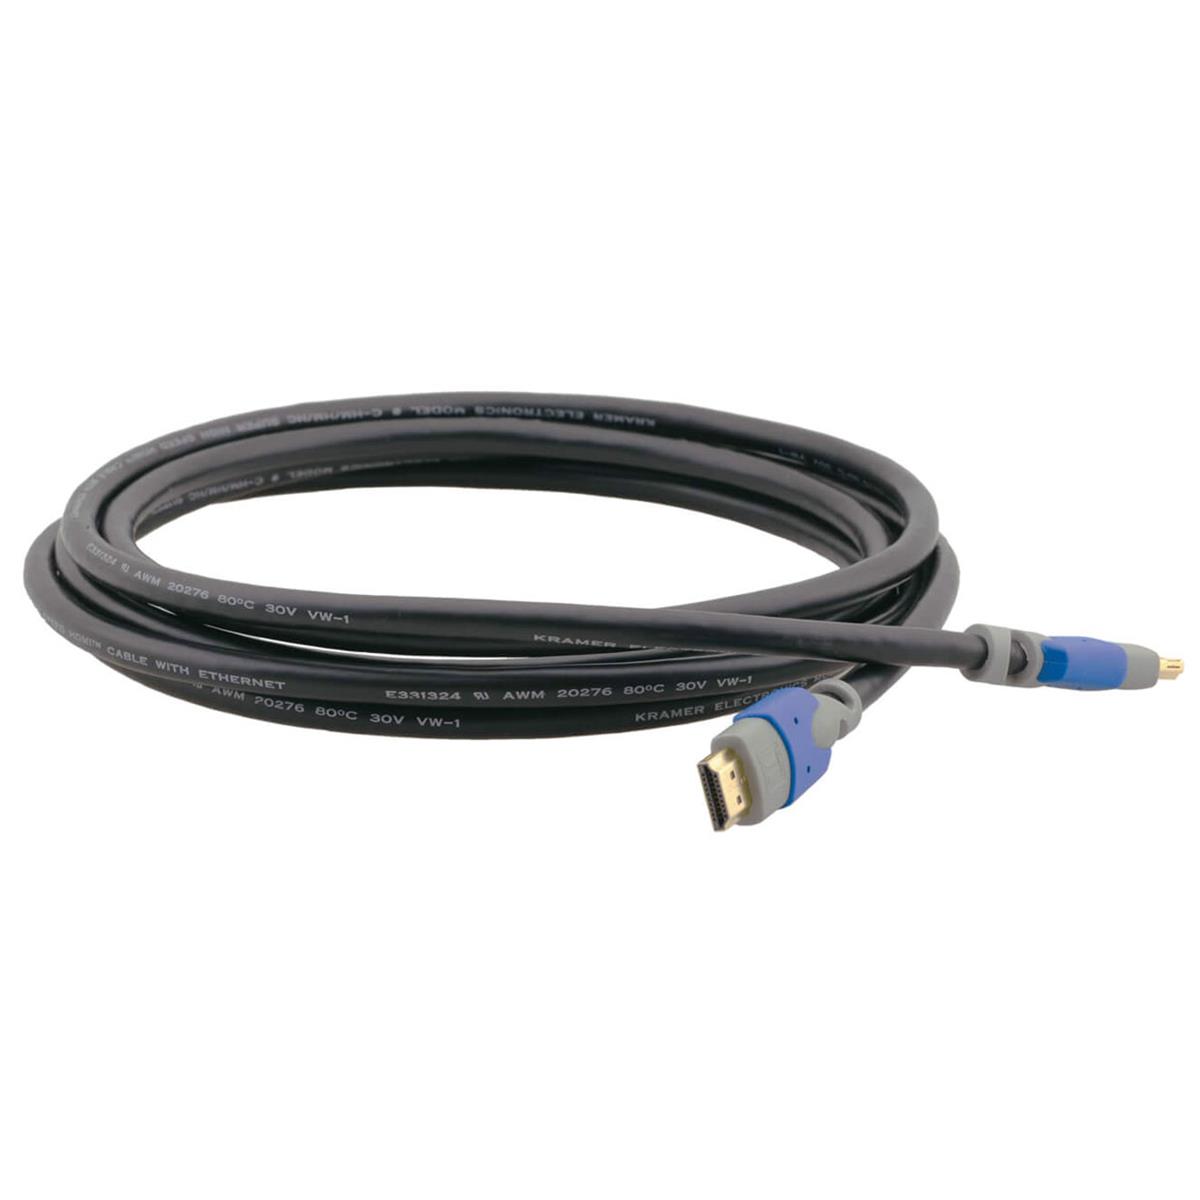 Photos - Cable (video, audio, USB) Kramer Electronics 35' HDMI (M) to HDMI (M) Home Cinema HDMI Cable w/Ether 